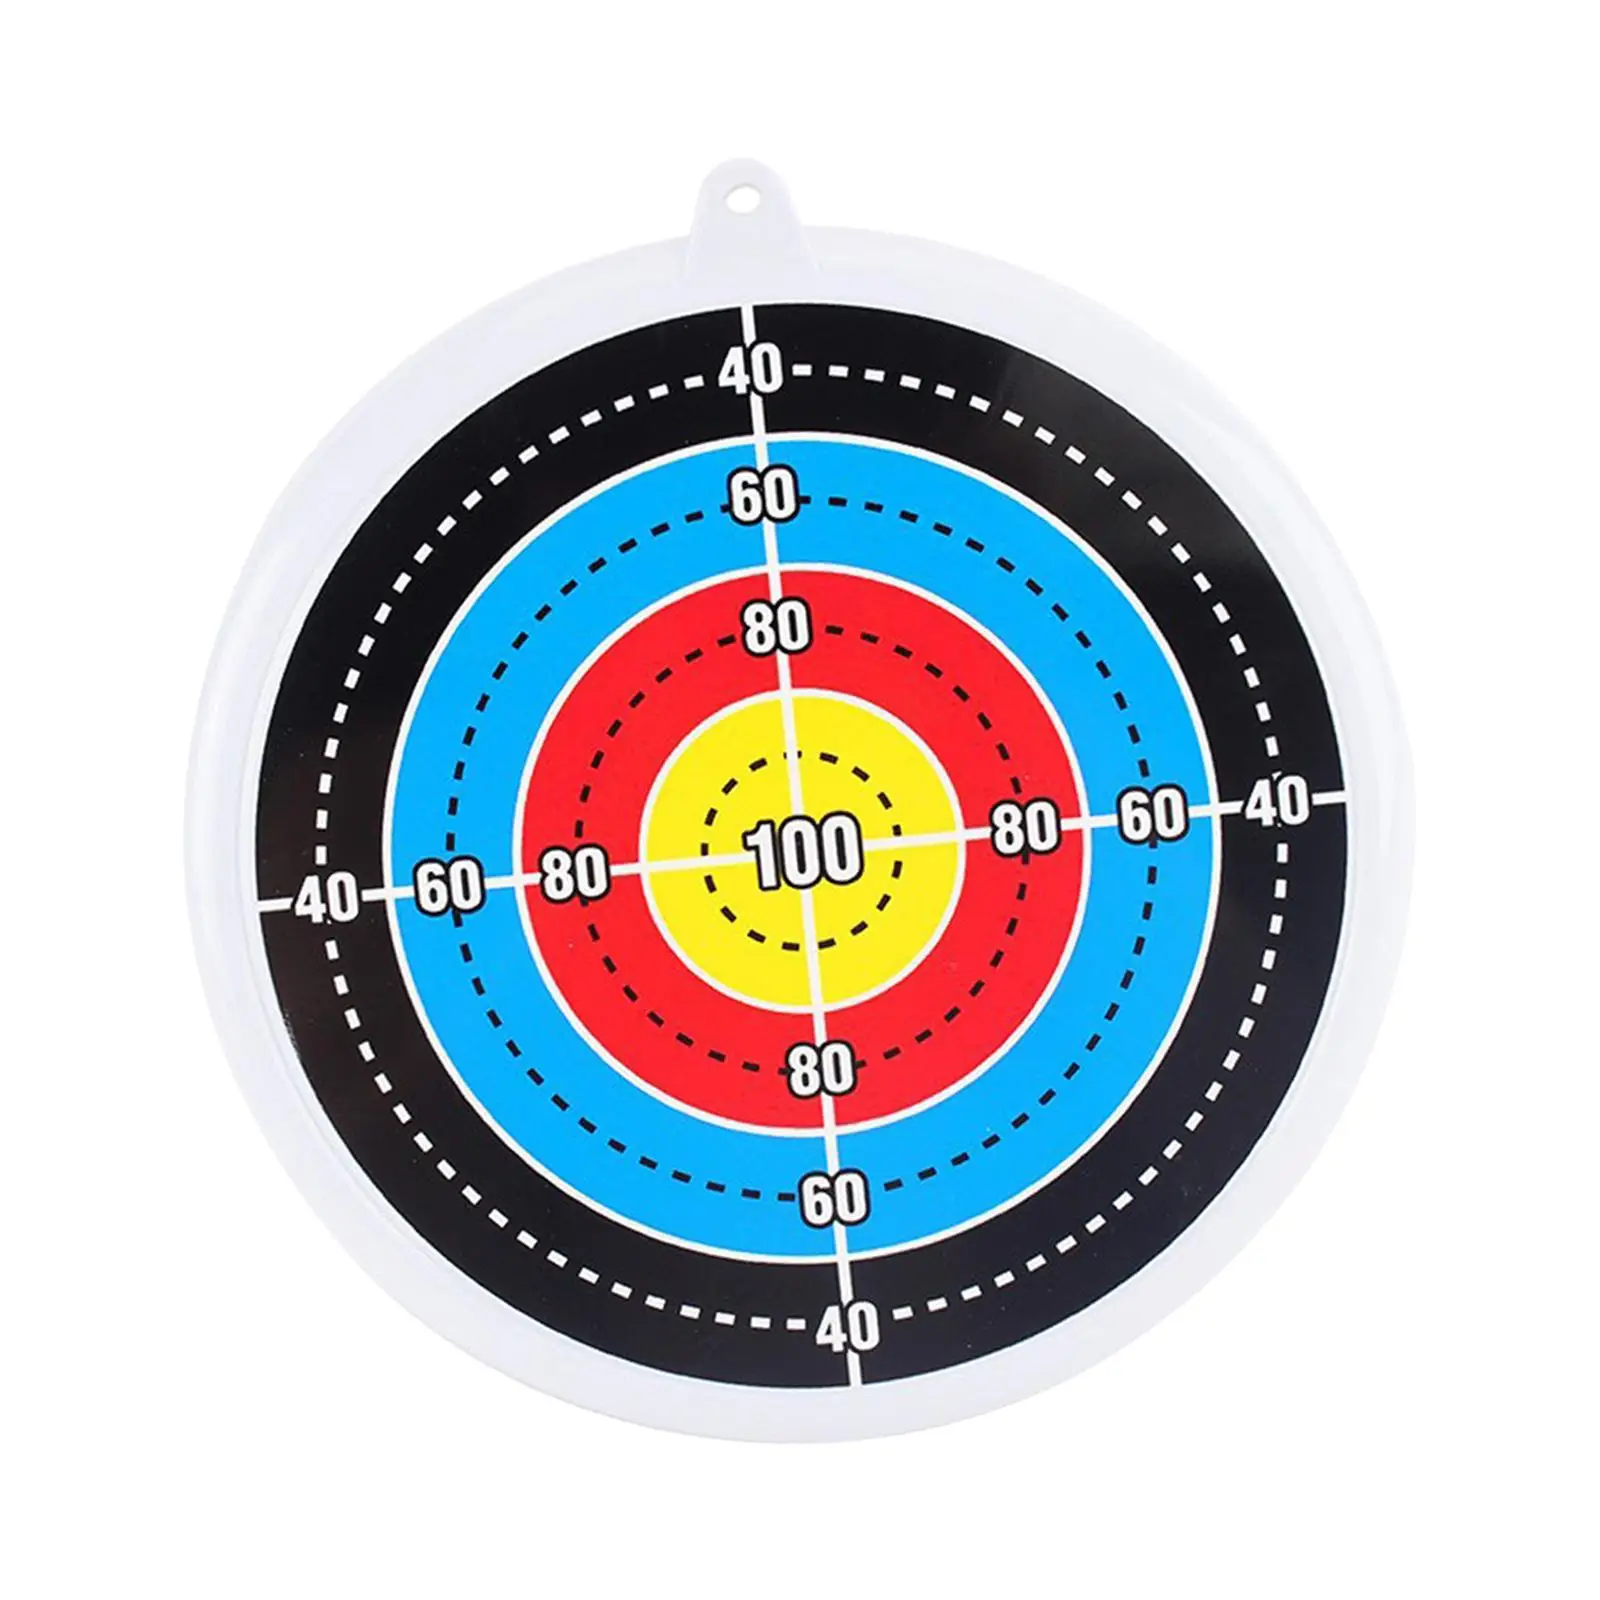 

Suction Cup Target Suction Arrows Target Portable Hanging Target Shooting Accessories for Children Kids Training Indoor Practice